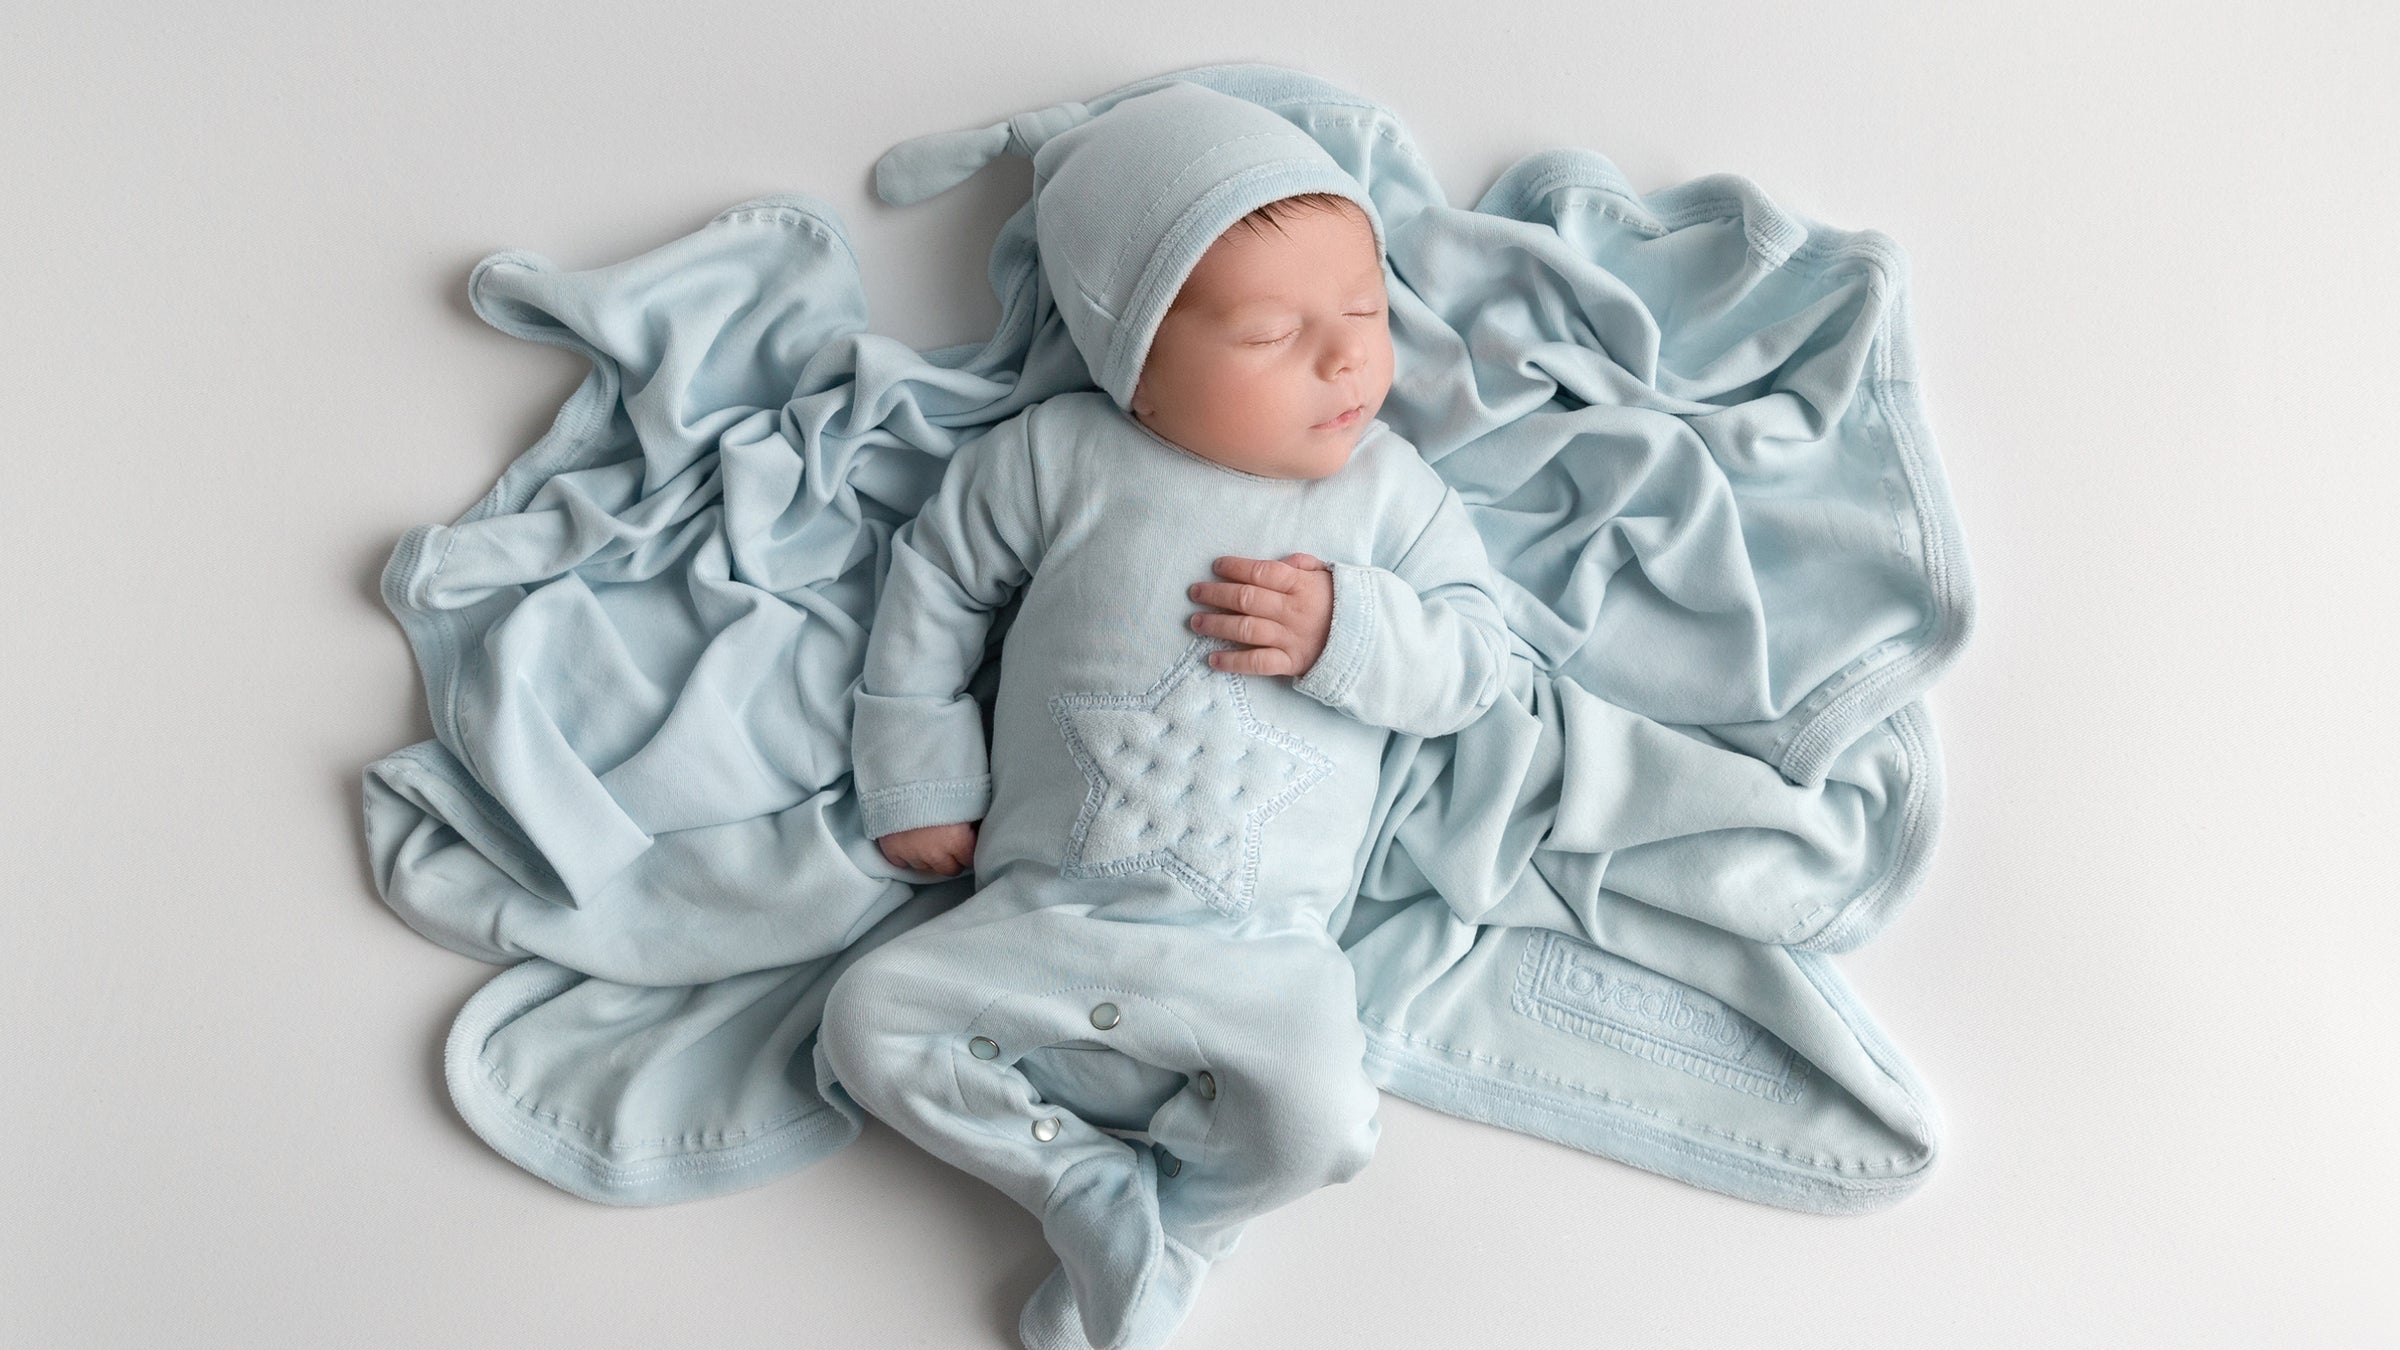 Image of boy sleeping, laying on moonbeam colored blanket from Velveteen collection. Wearing star appliqué footie from same collection and matching knotted hat.